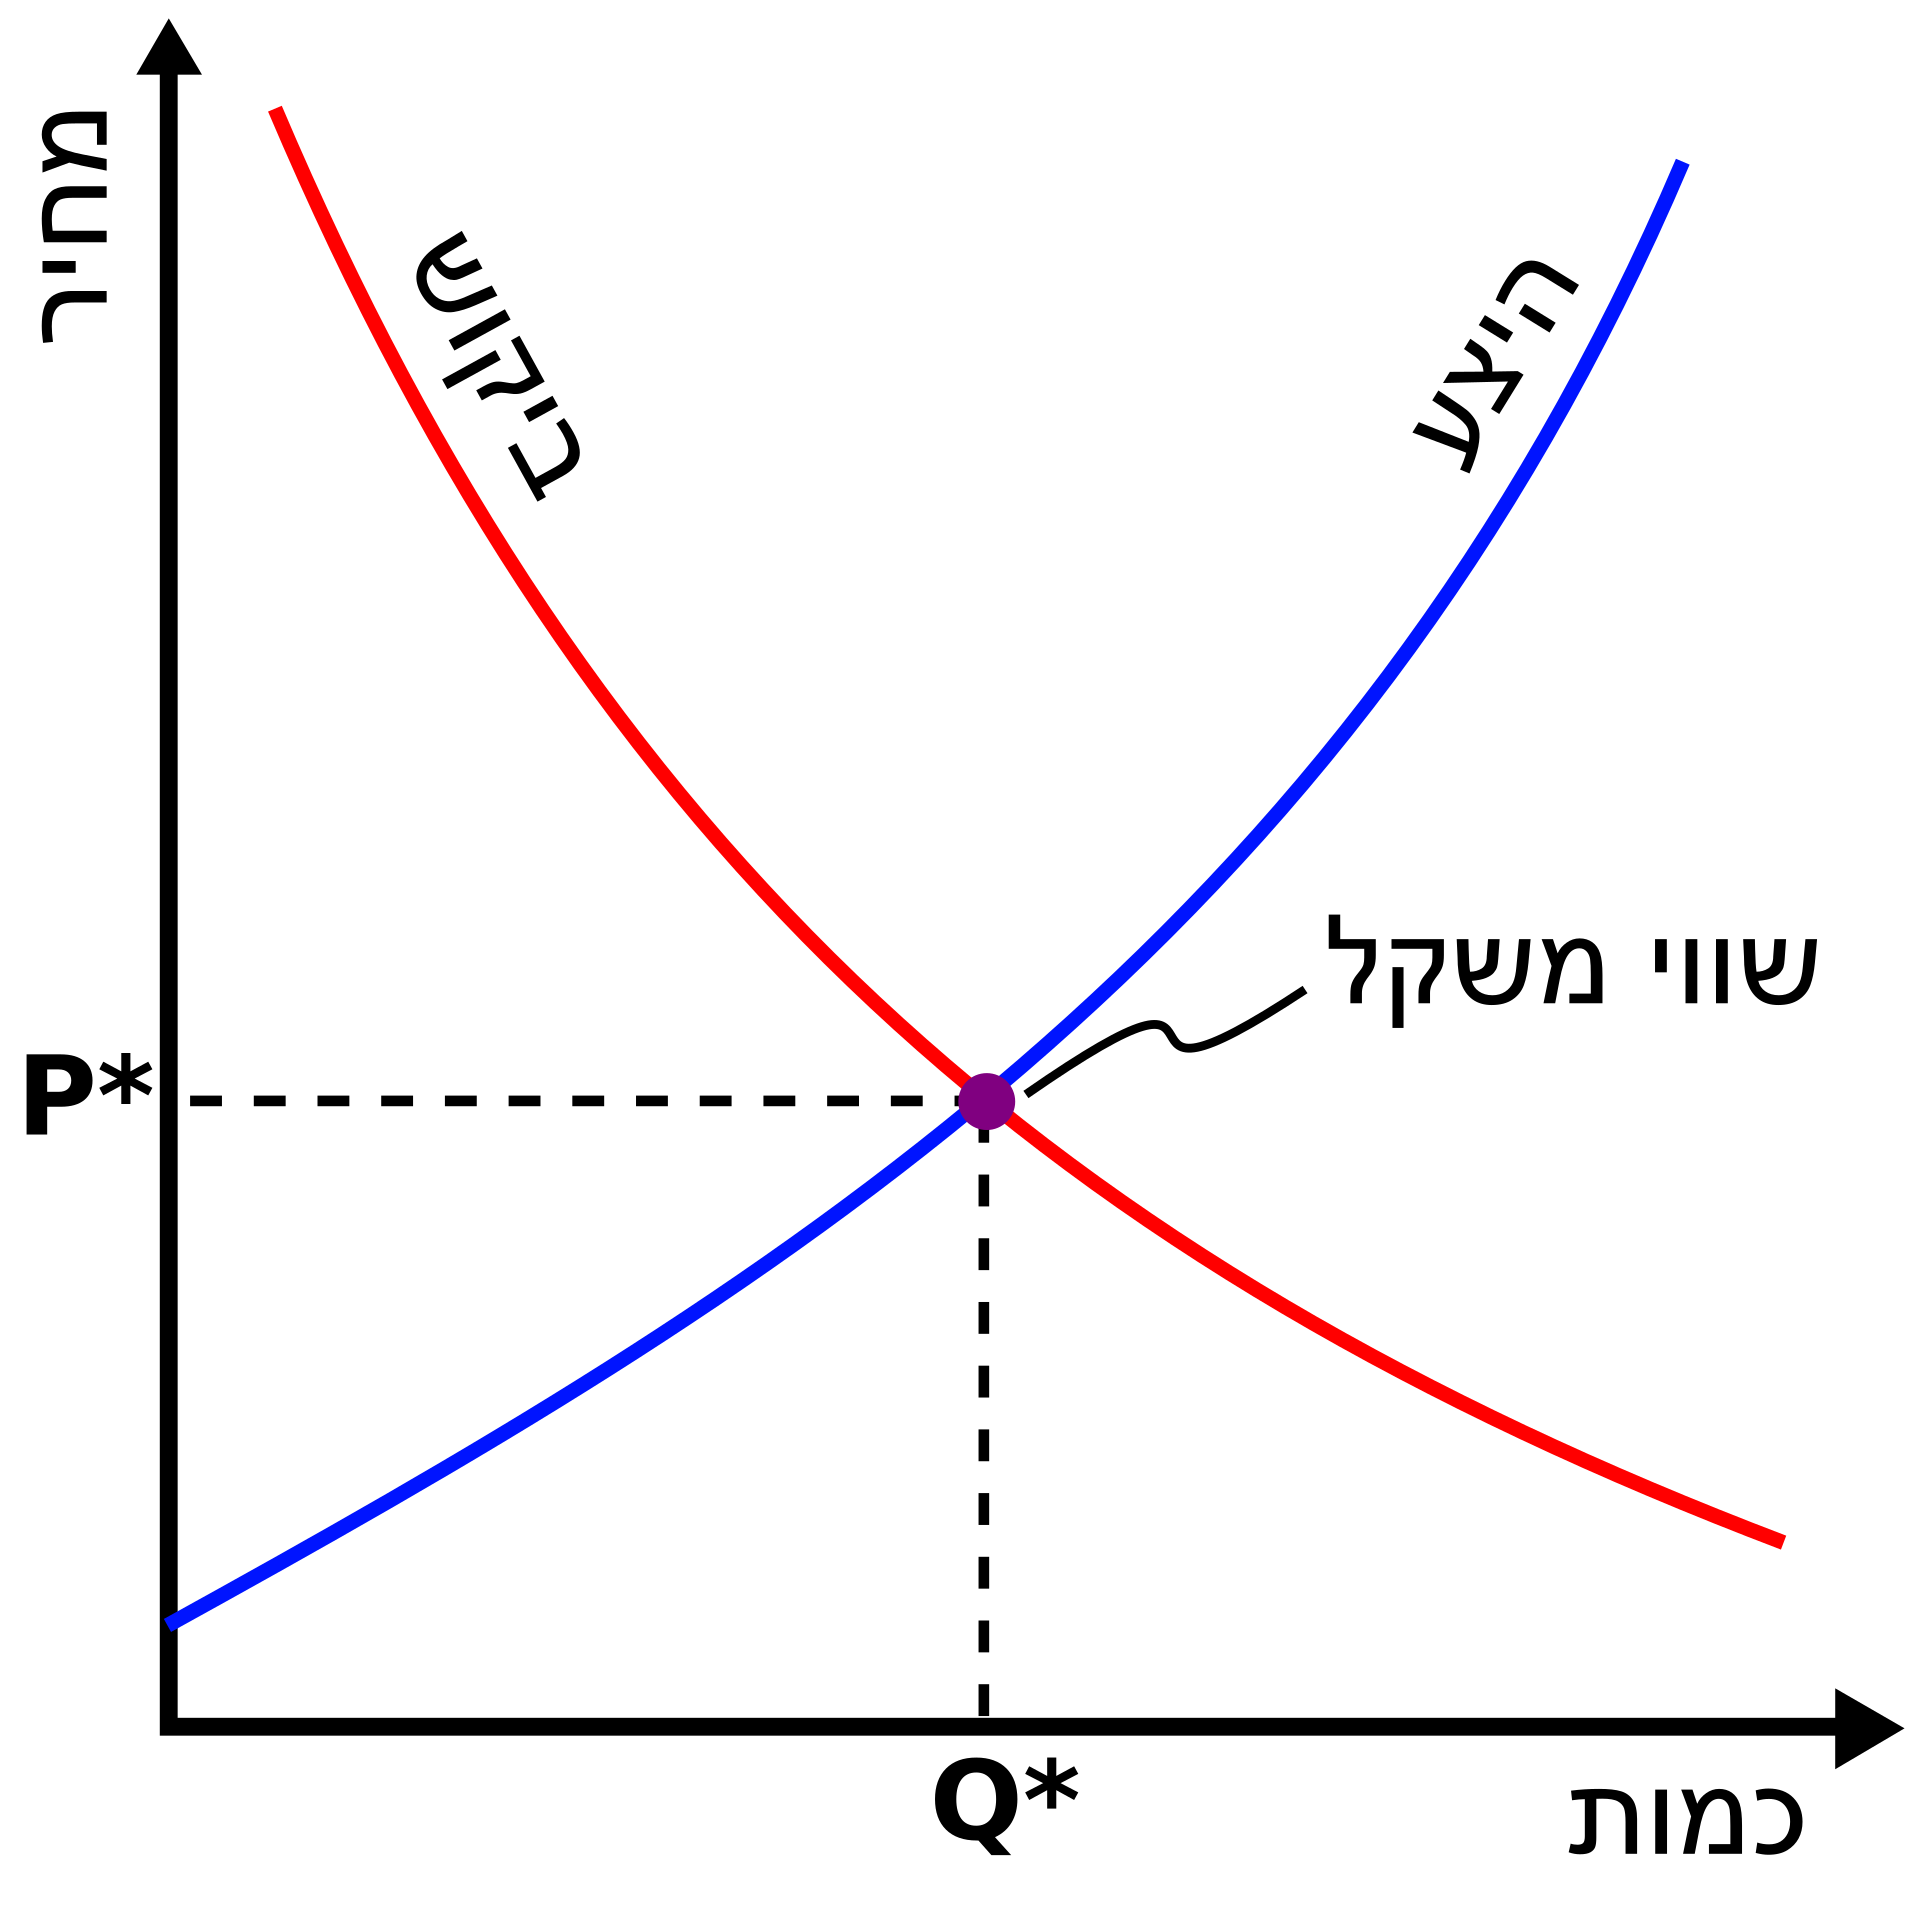 1920px-Supply-demand-equilibrium-he.svg.png